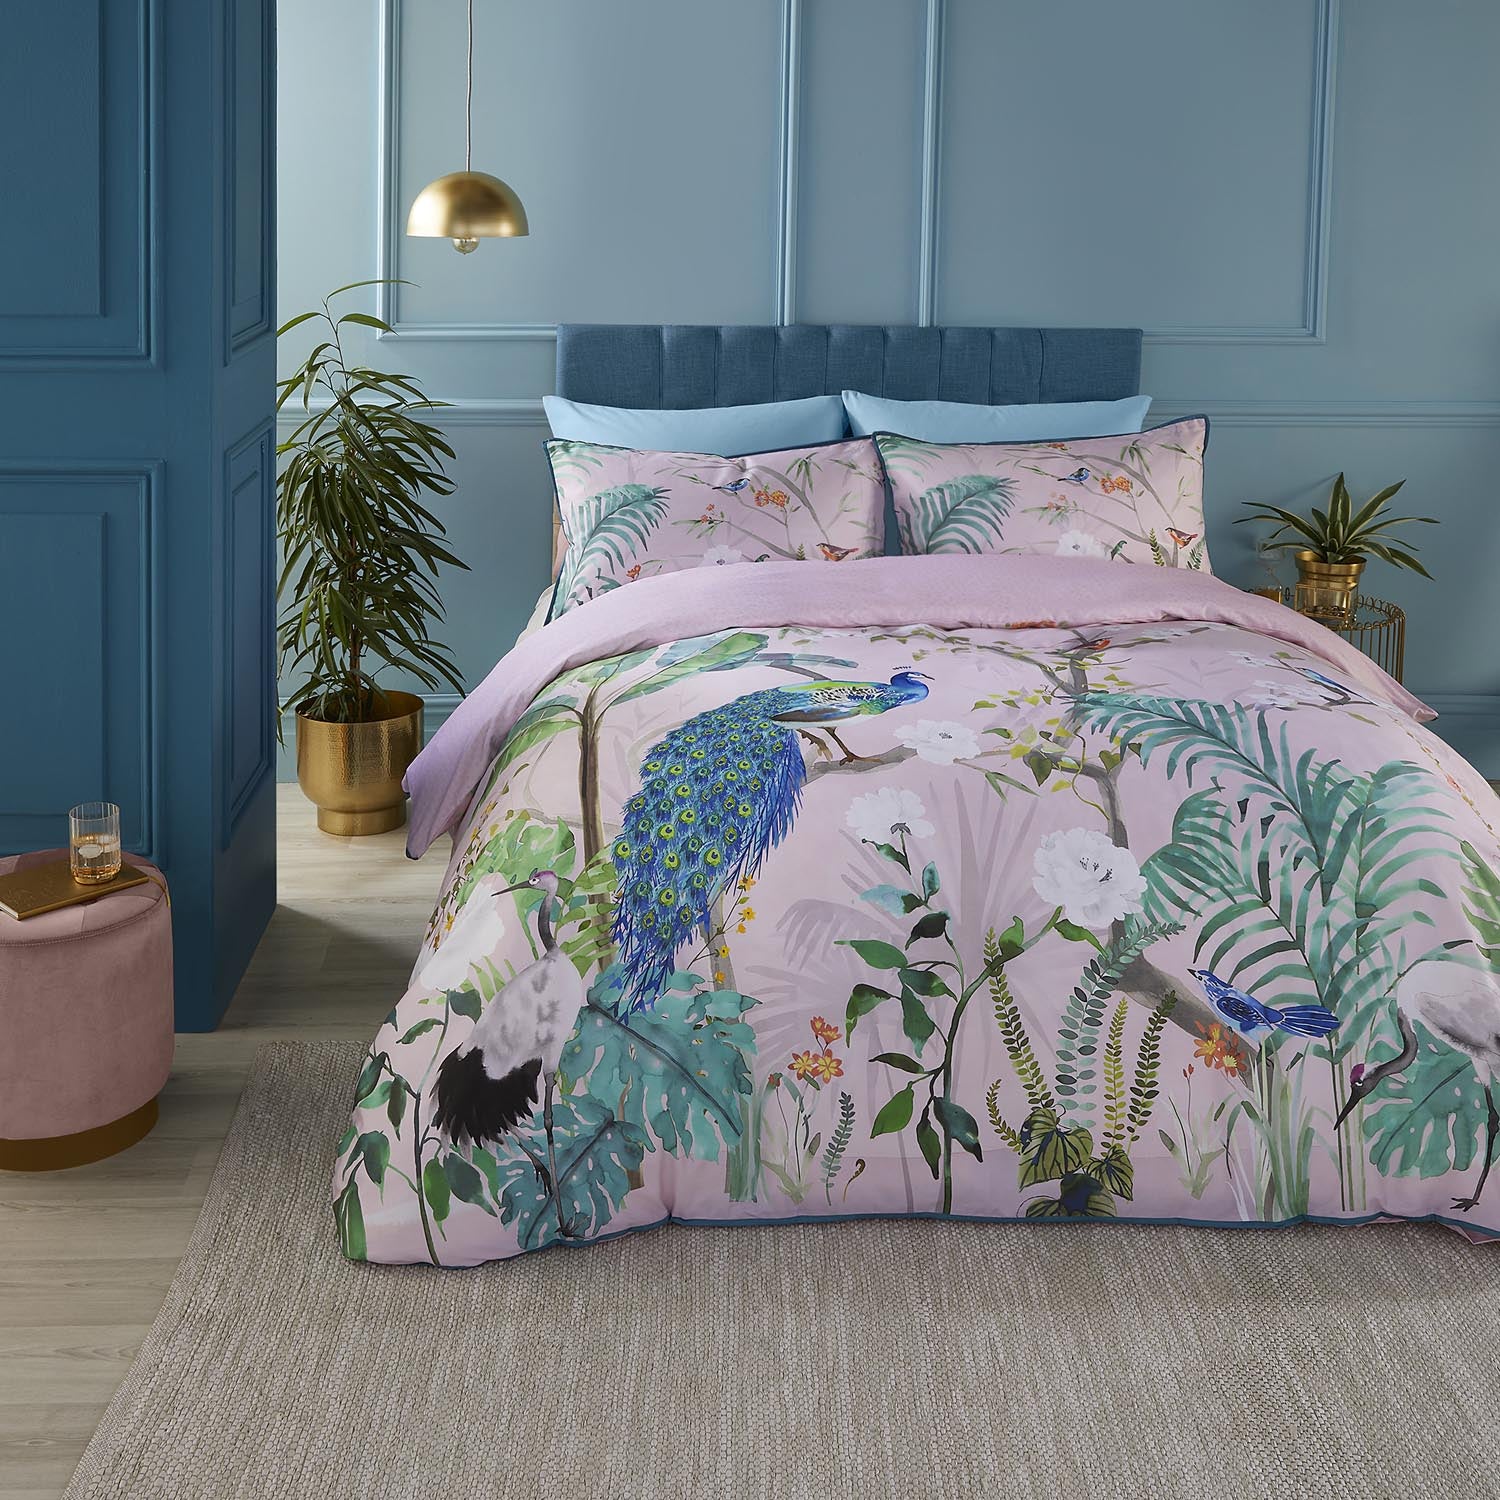  Heather And Ferne Paradisio Pink Duvet Cover Set 1 Shaws Department Stores